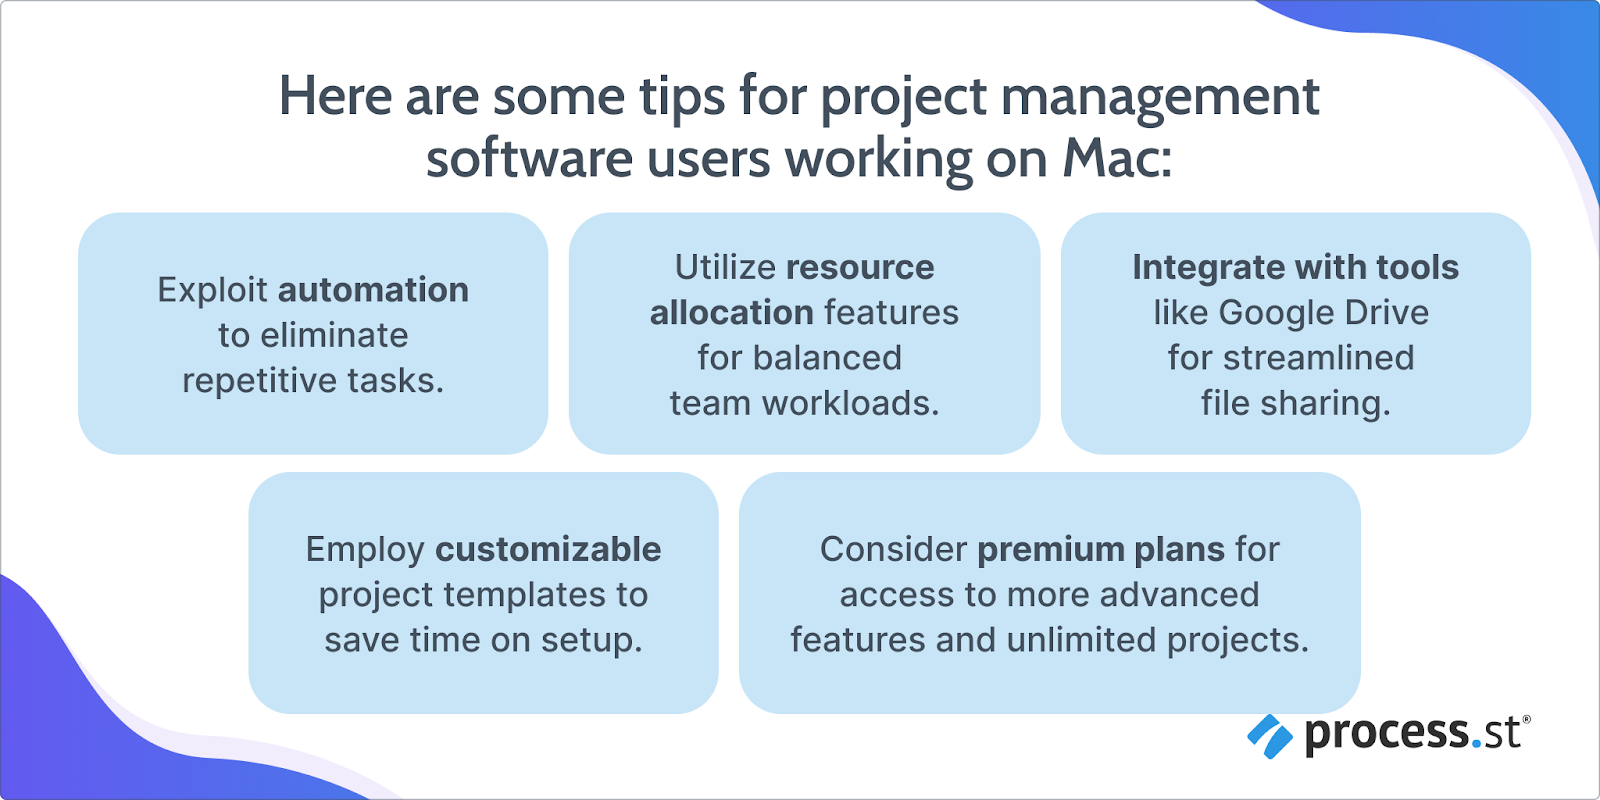 Image showing tips for using project management software on Mac.